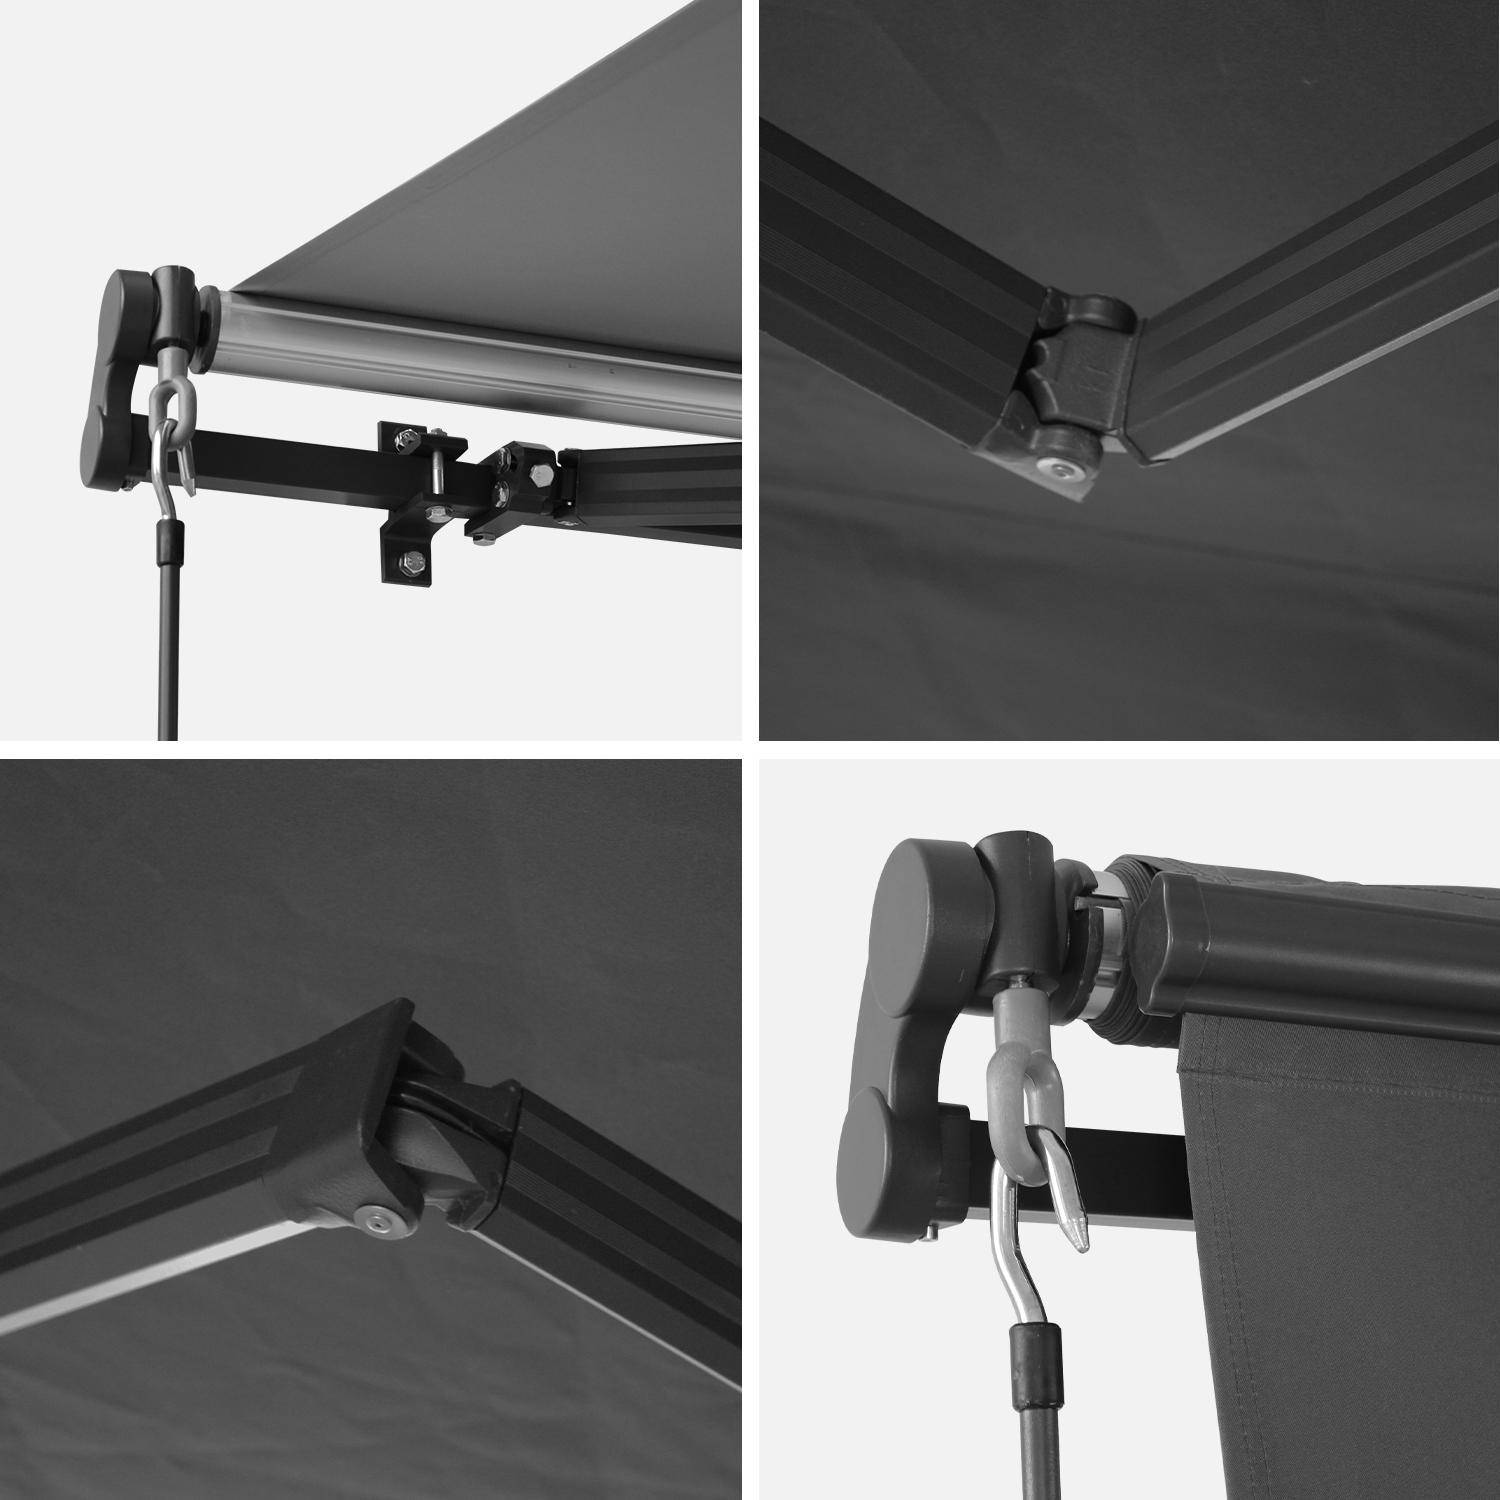 Retractable Patio Awning - wall awning, aluminium structure, manual system, coated polyester fabric - Alombra 3x2m - Grey,sweeek,Photo4